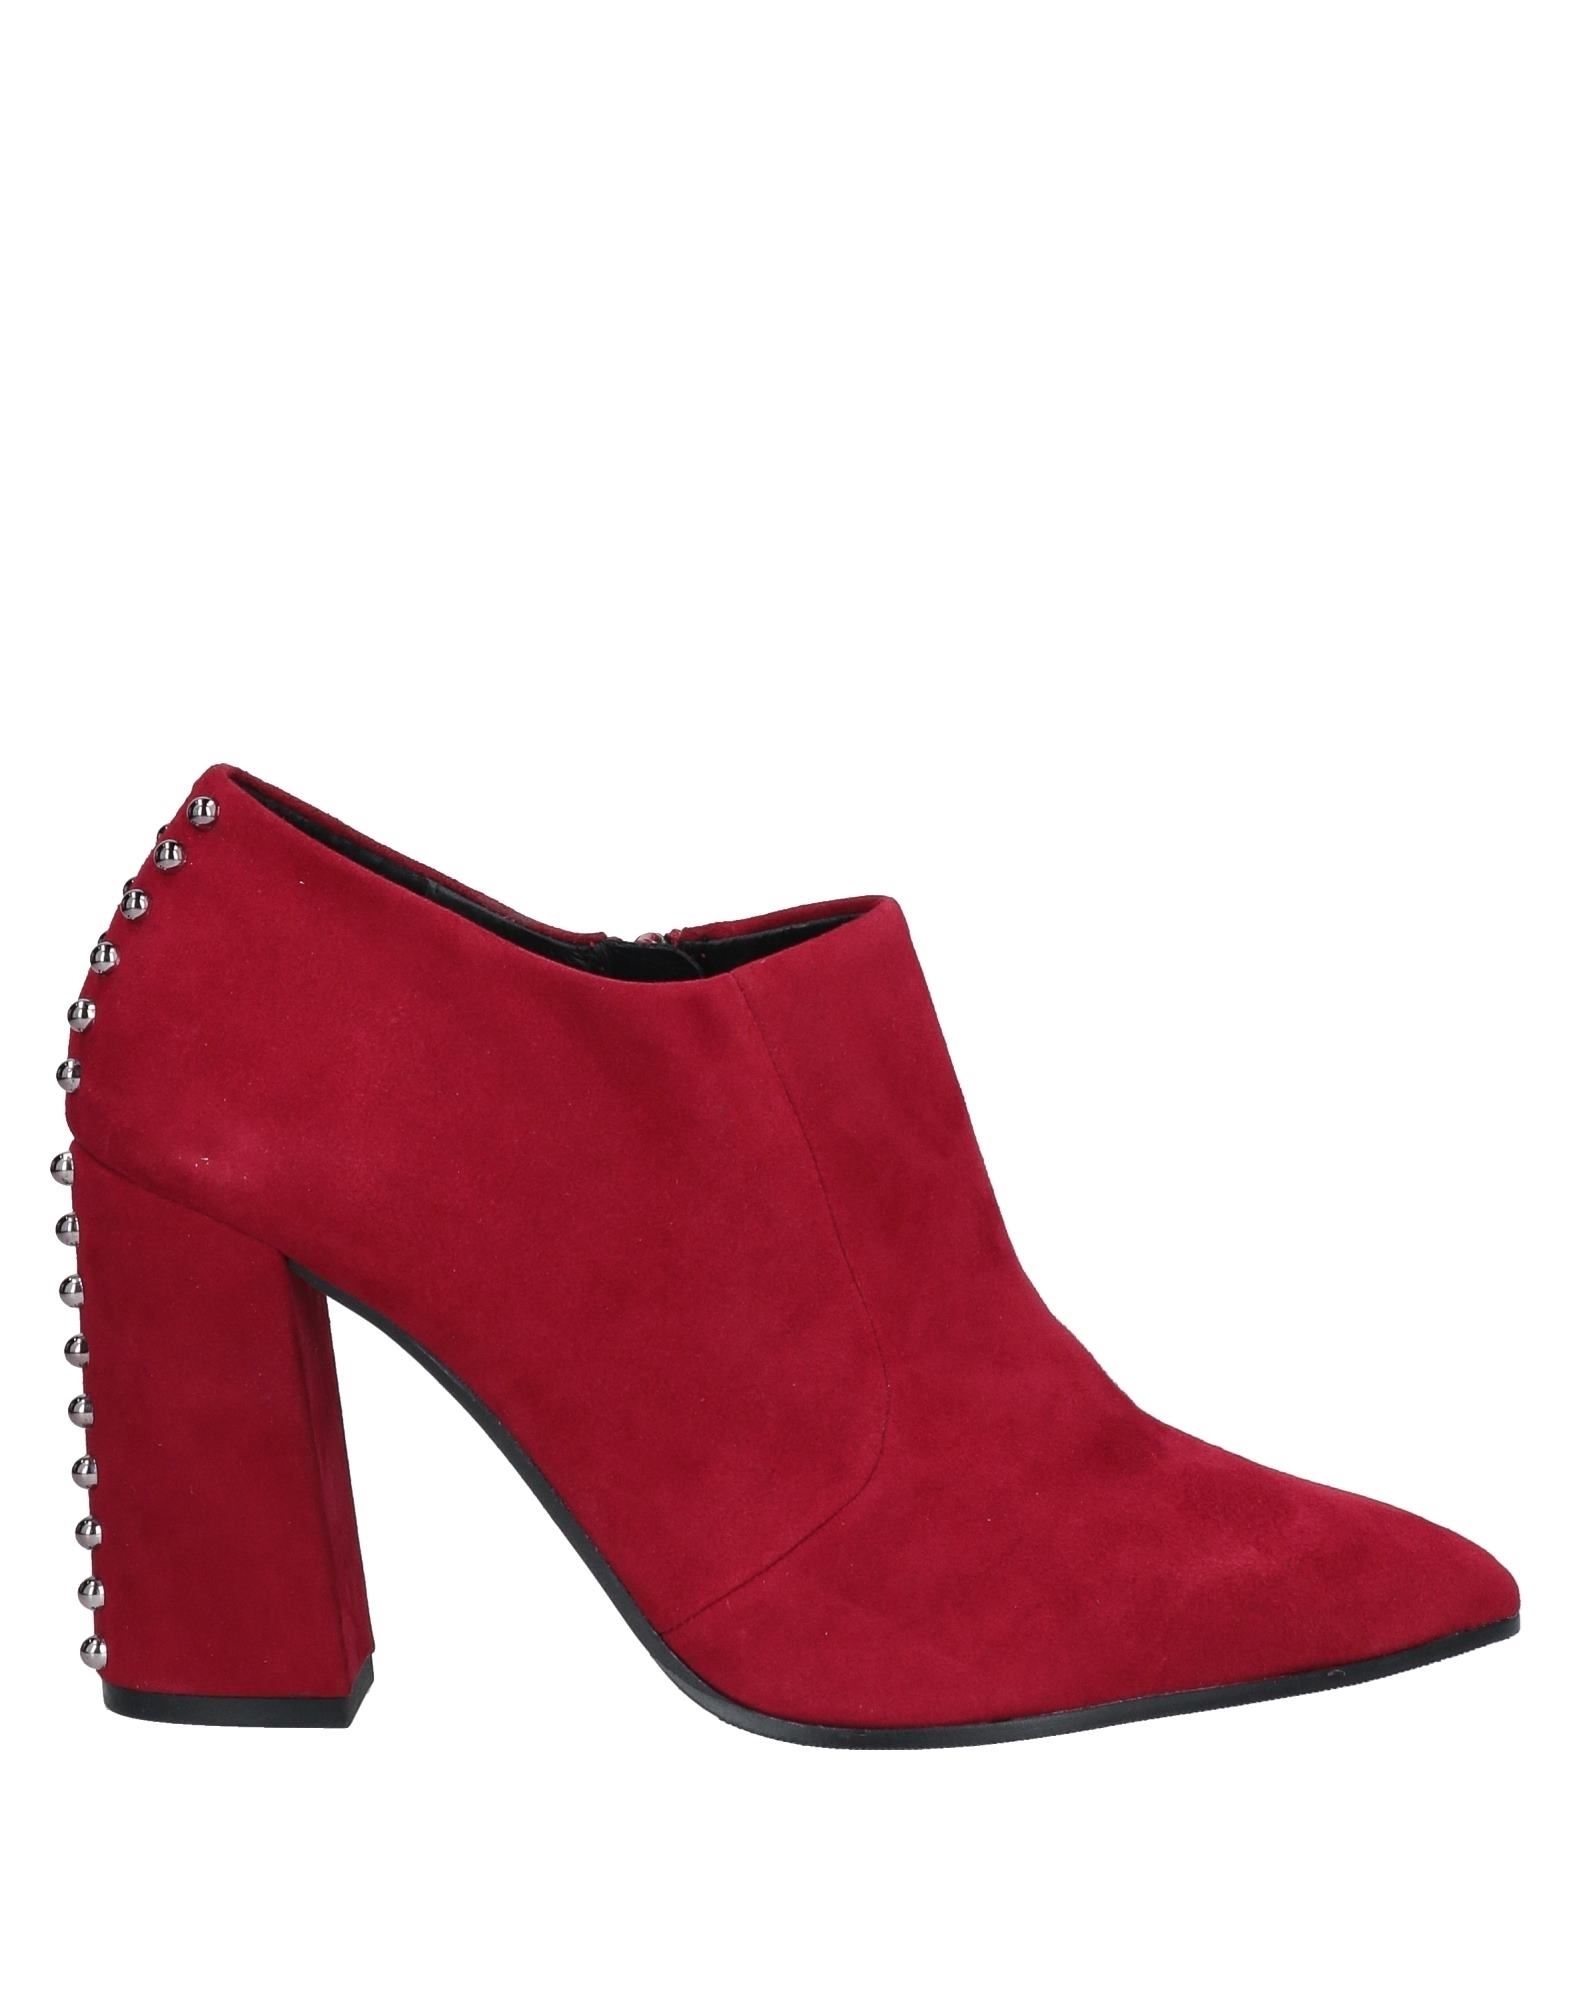 Adele Dezotti Ankle Boots In Red